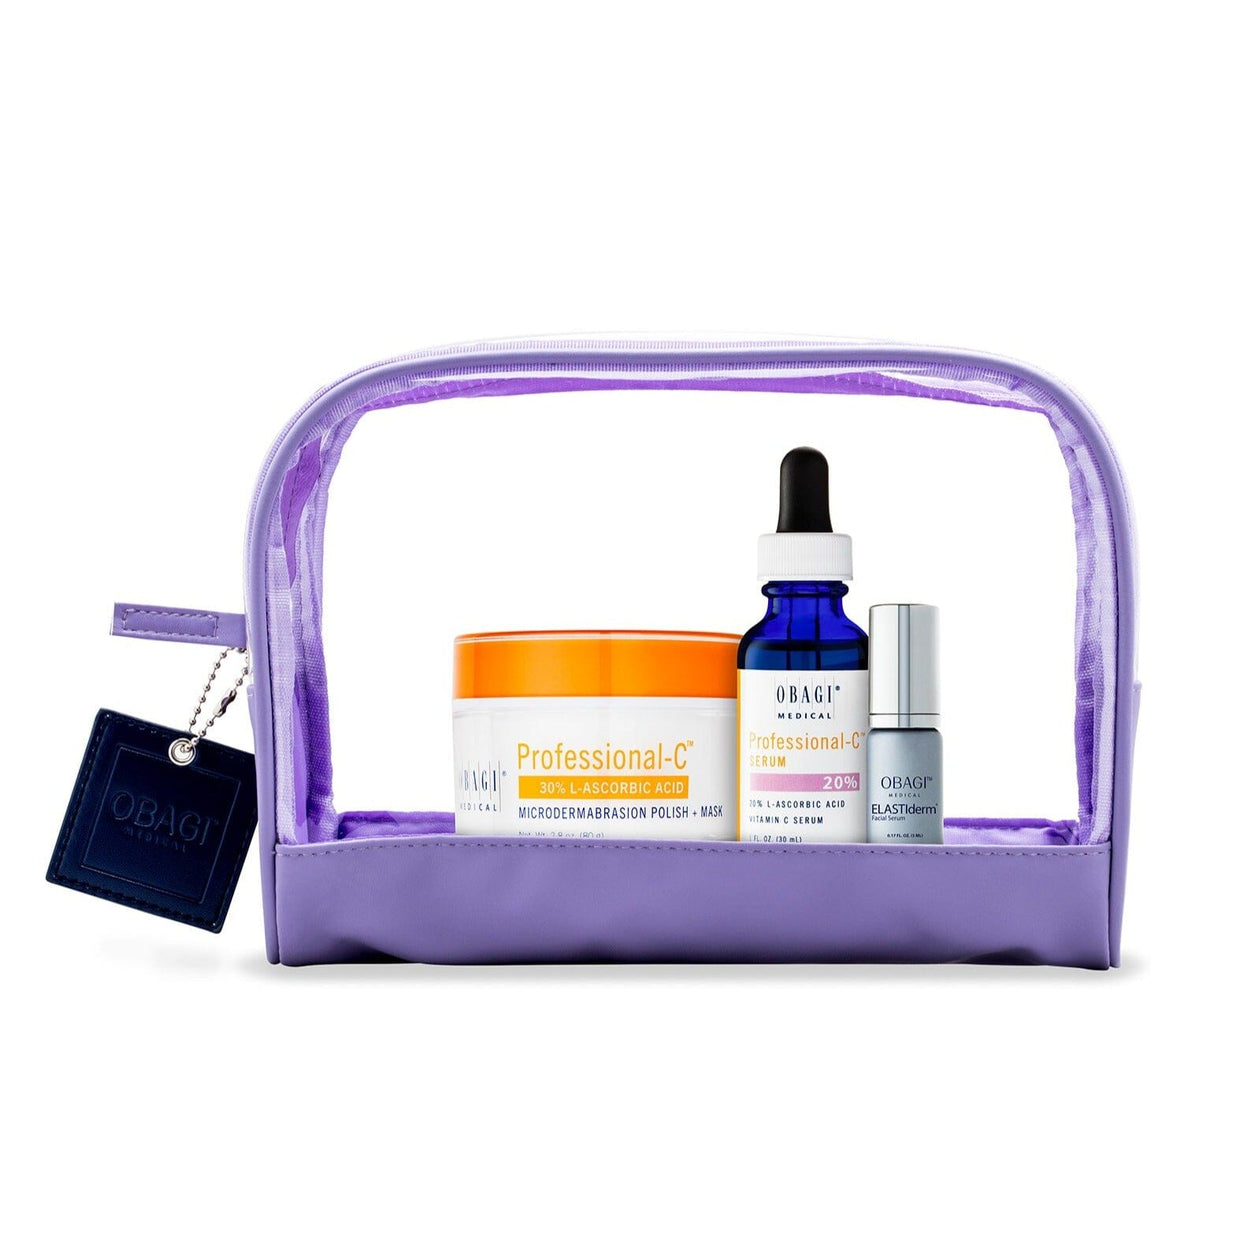 Obagi Force Field Kit with Professional-C Serum 20% Obagi Shop at Exclusive Beauty Club